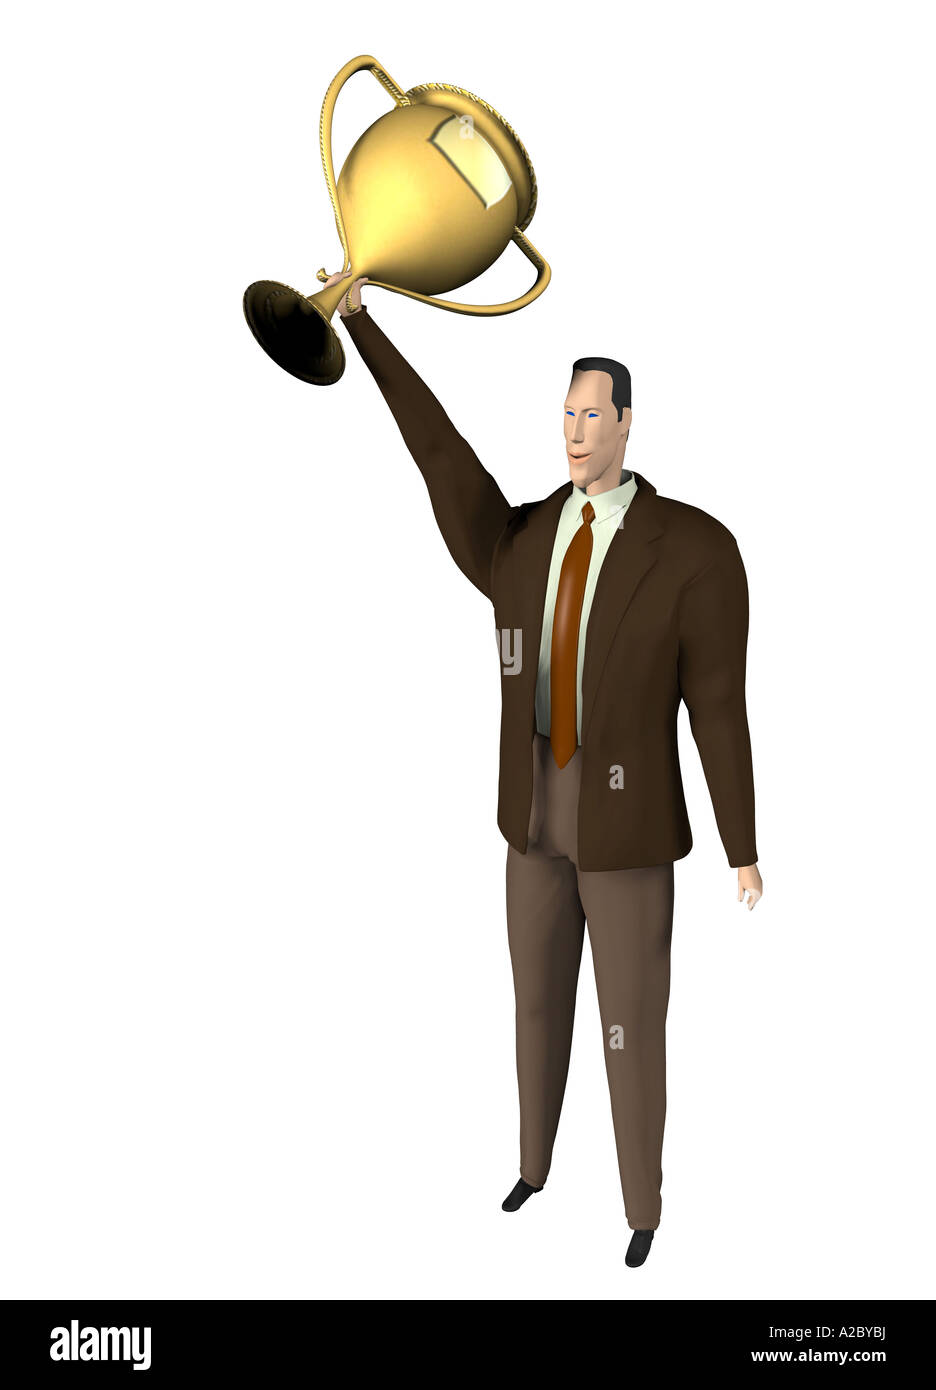 Businessman with trophy Stock Photo